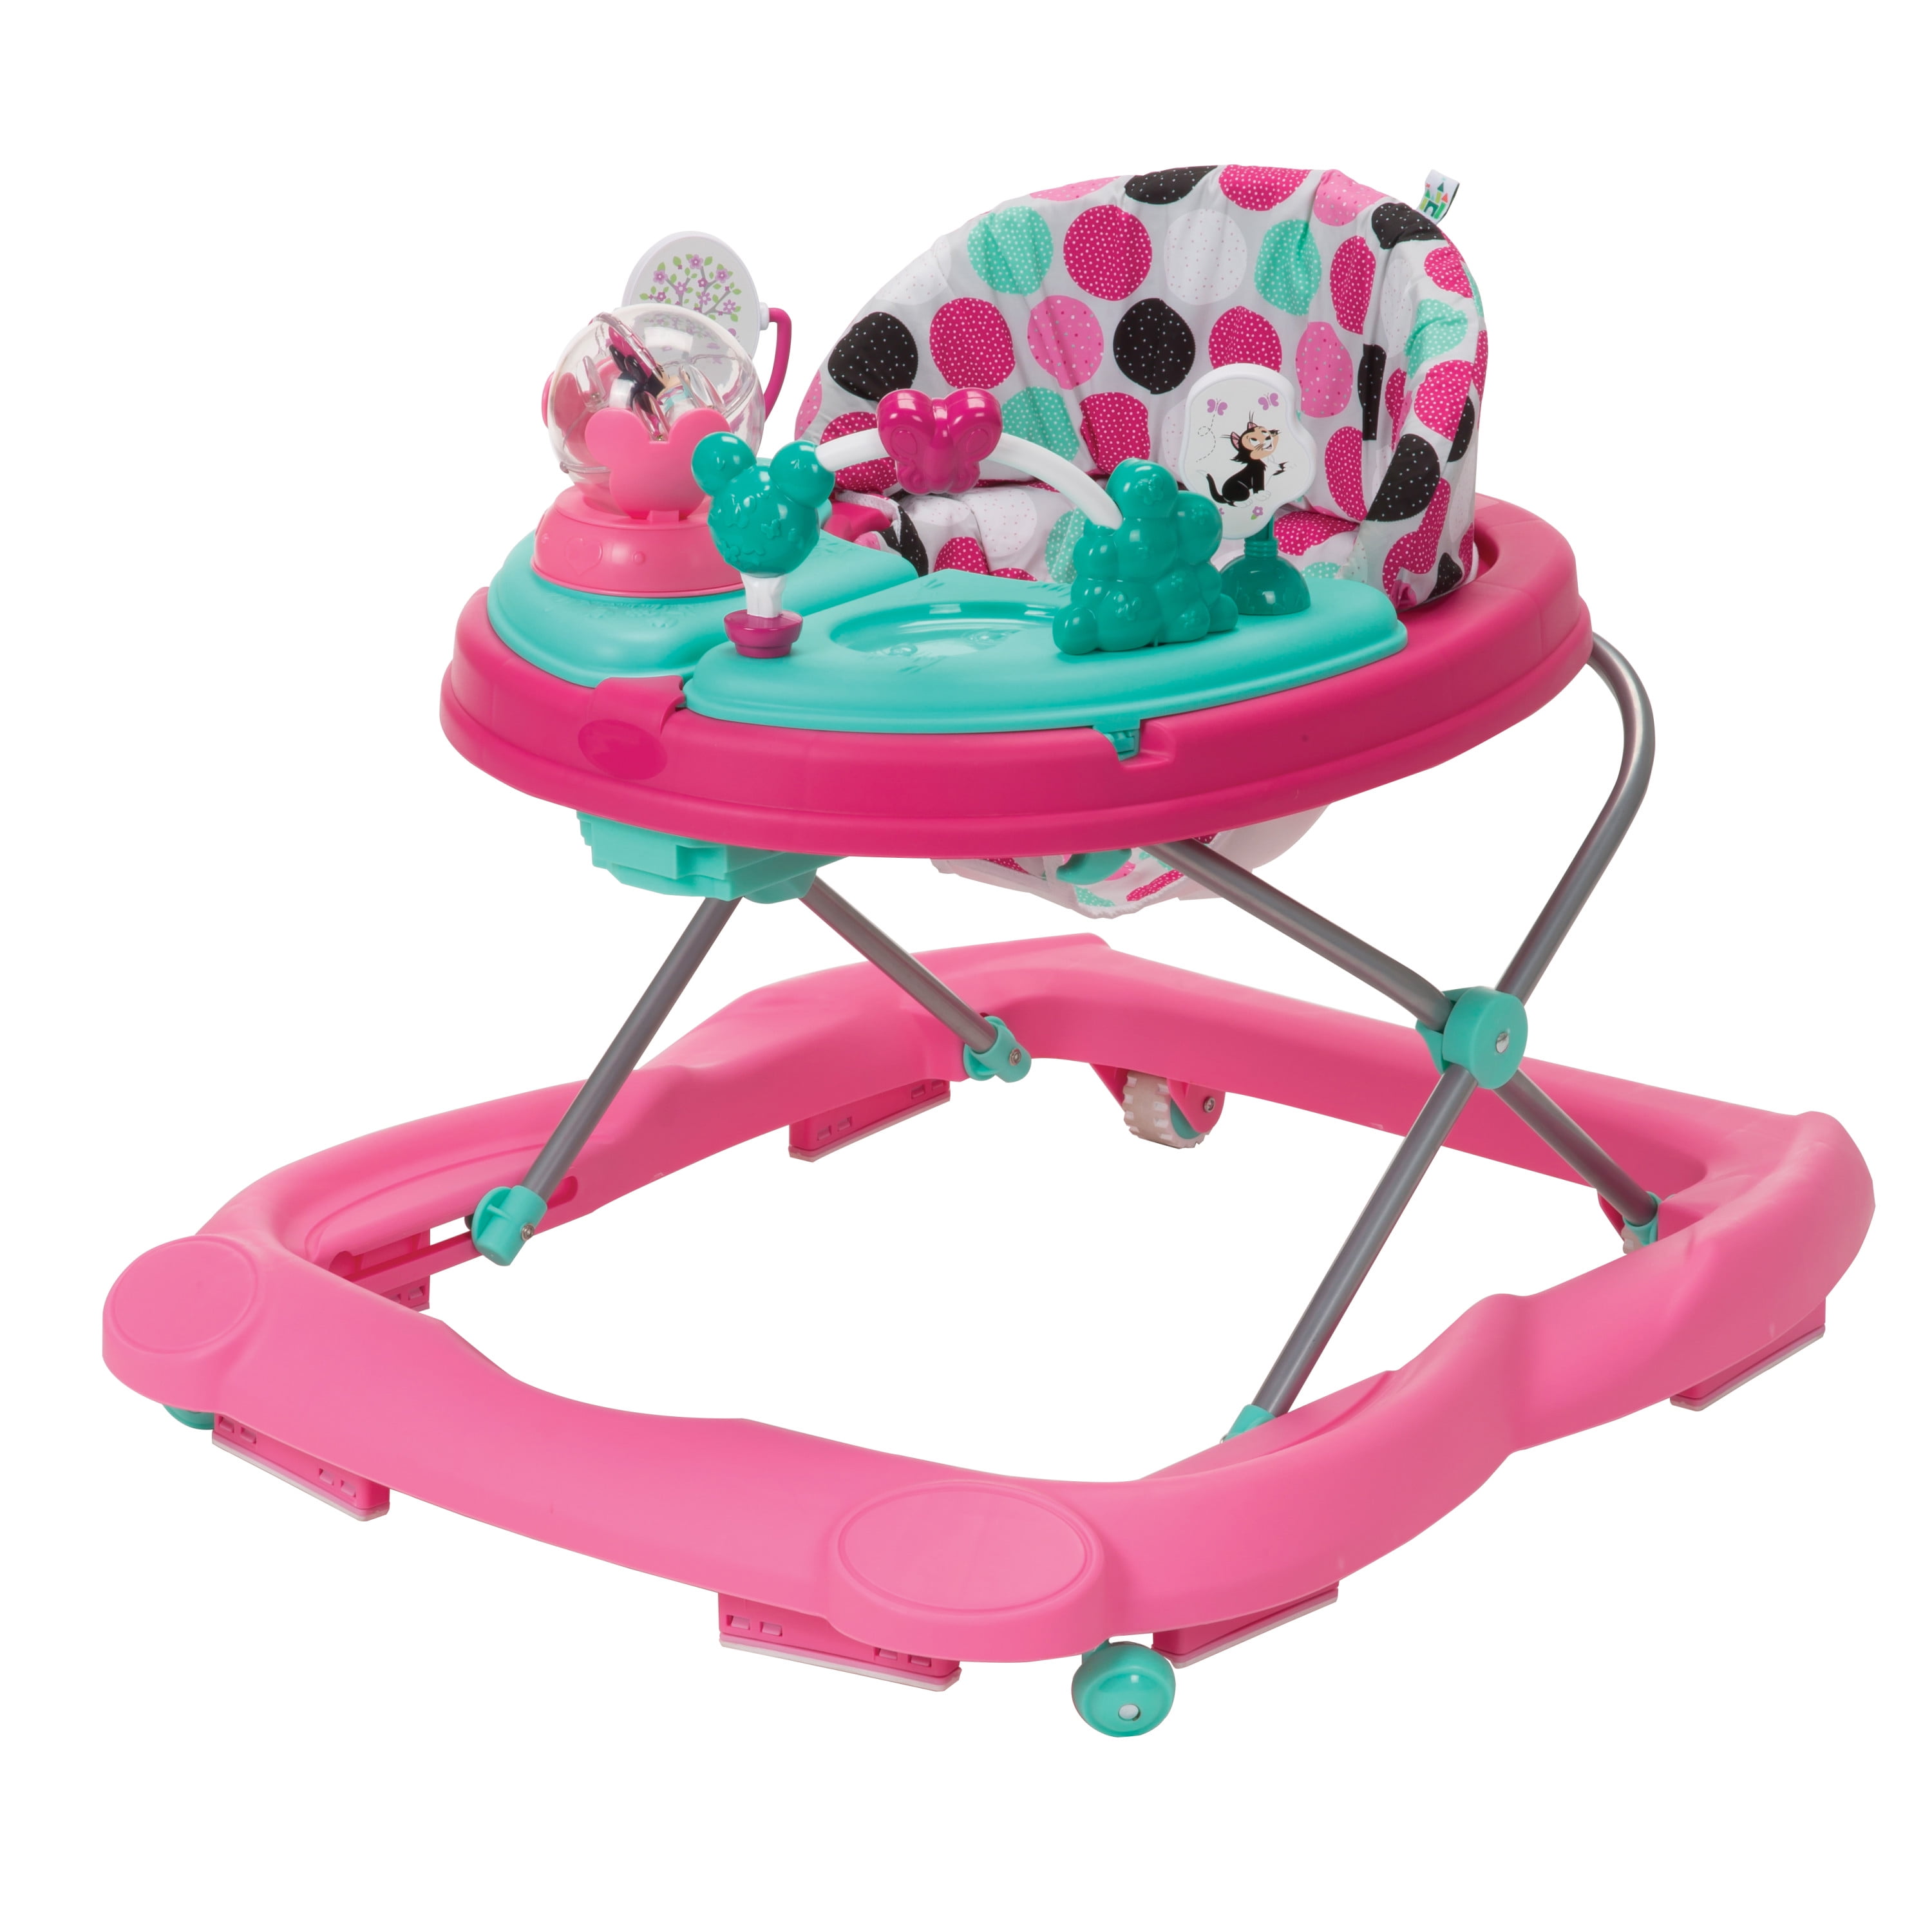 Baby Trend Walker Emily 1-24 months Adjustable Height With Tray Multiple Colors 